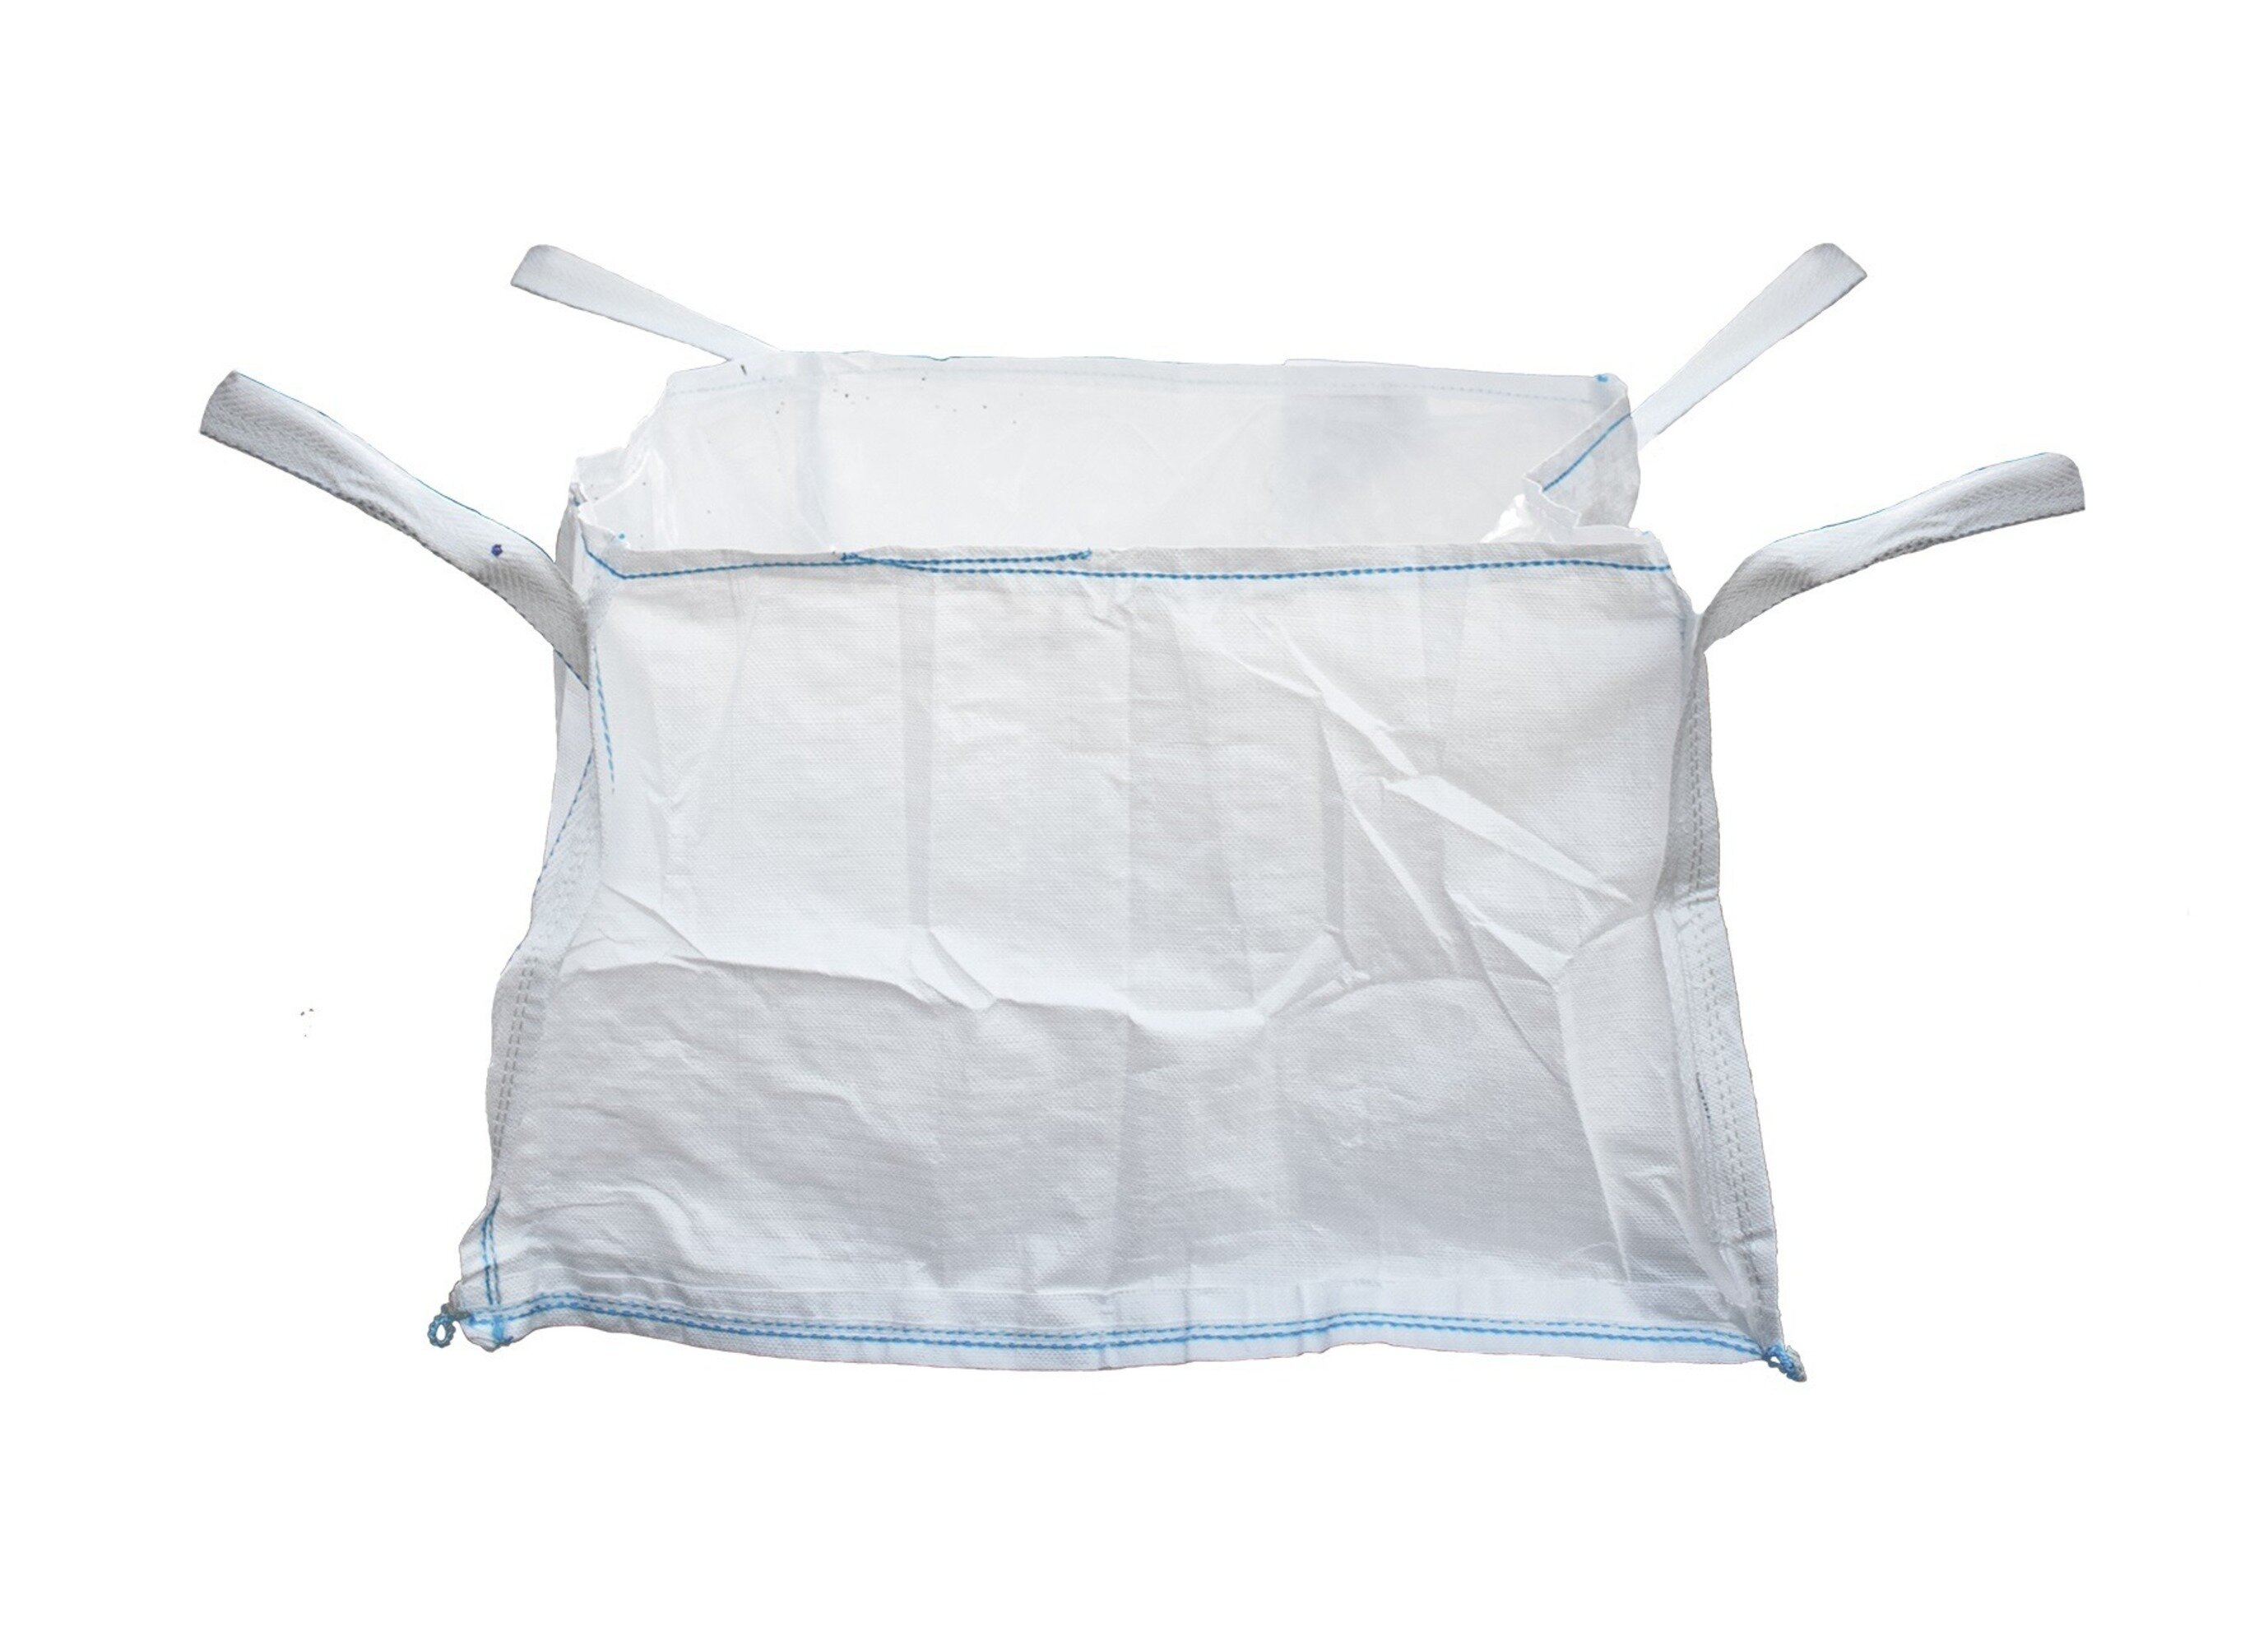 3.5 Gallon Trash Bags, 150 Count Small Trash Can Liners for